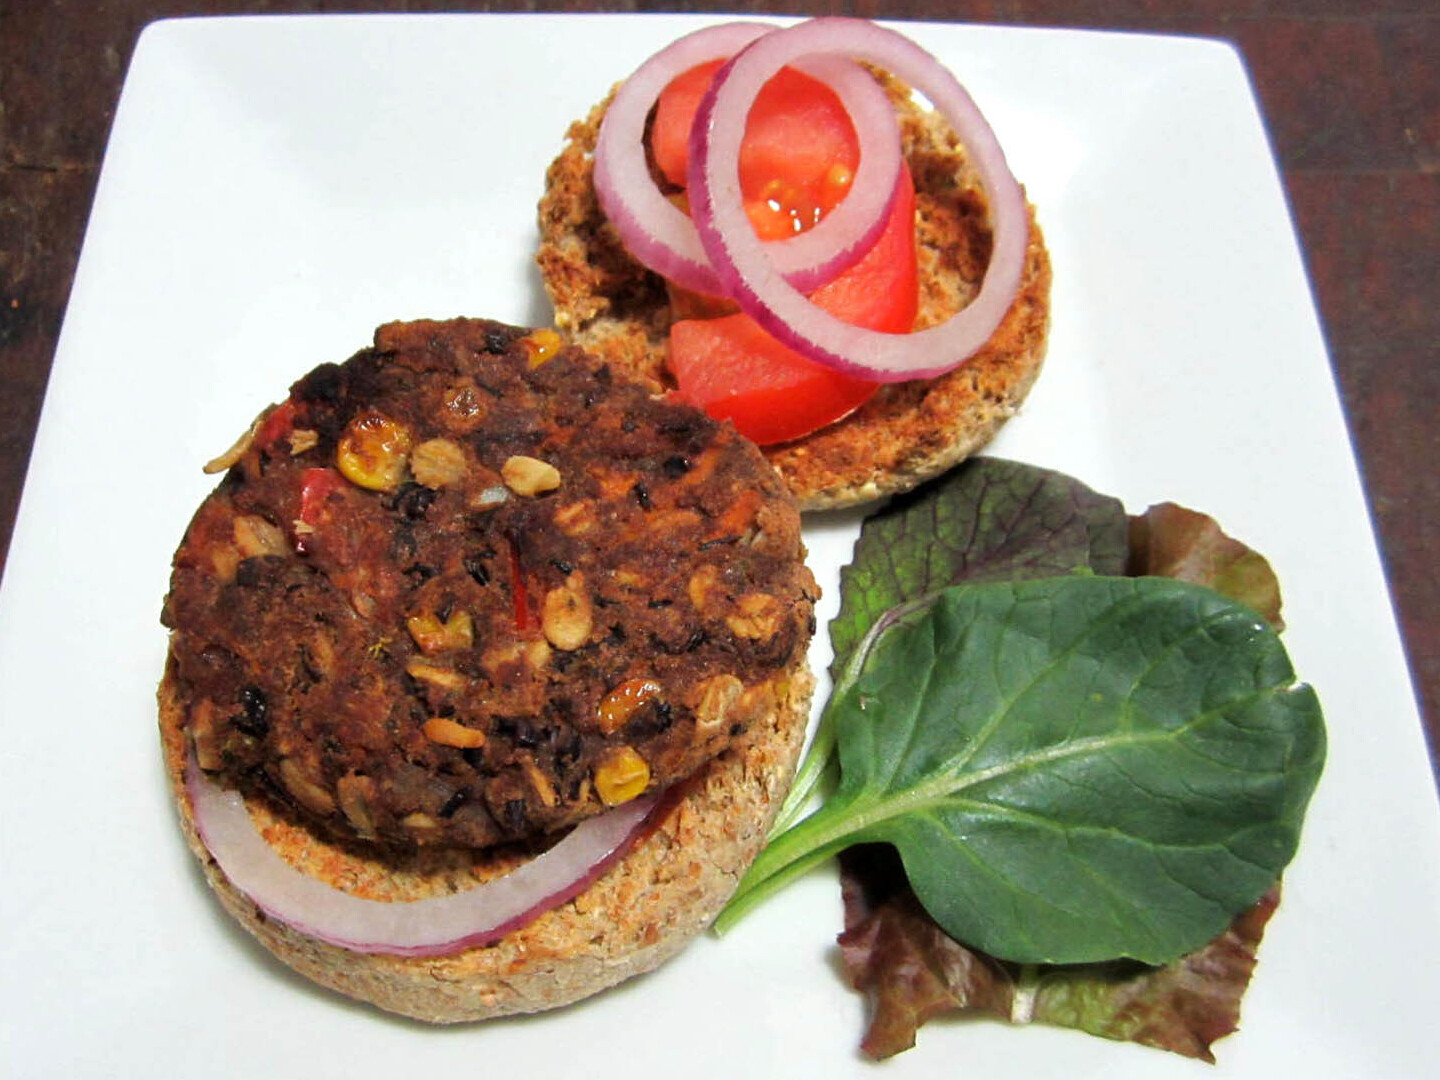 Black bean burgers with red onion, tomato, and lettuce